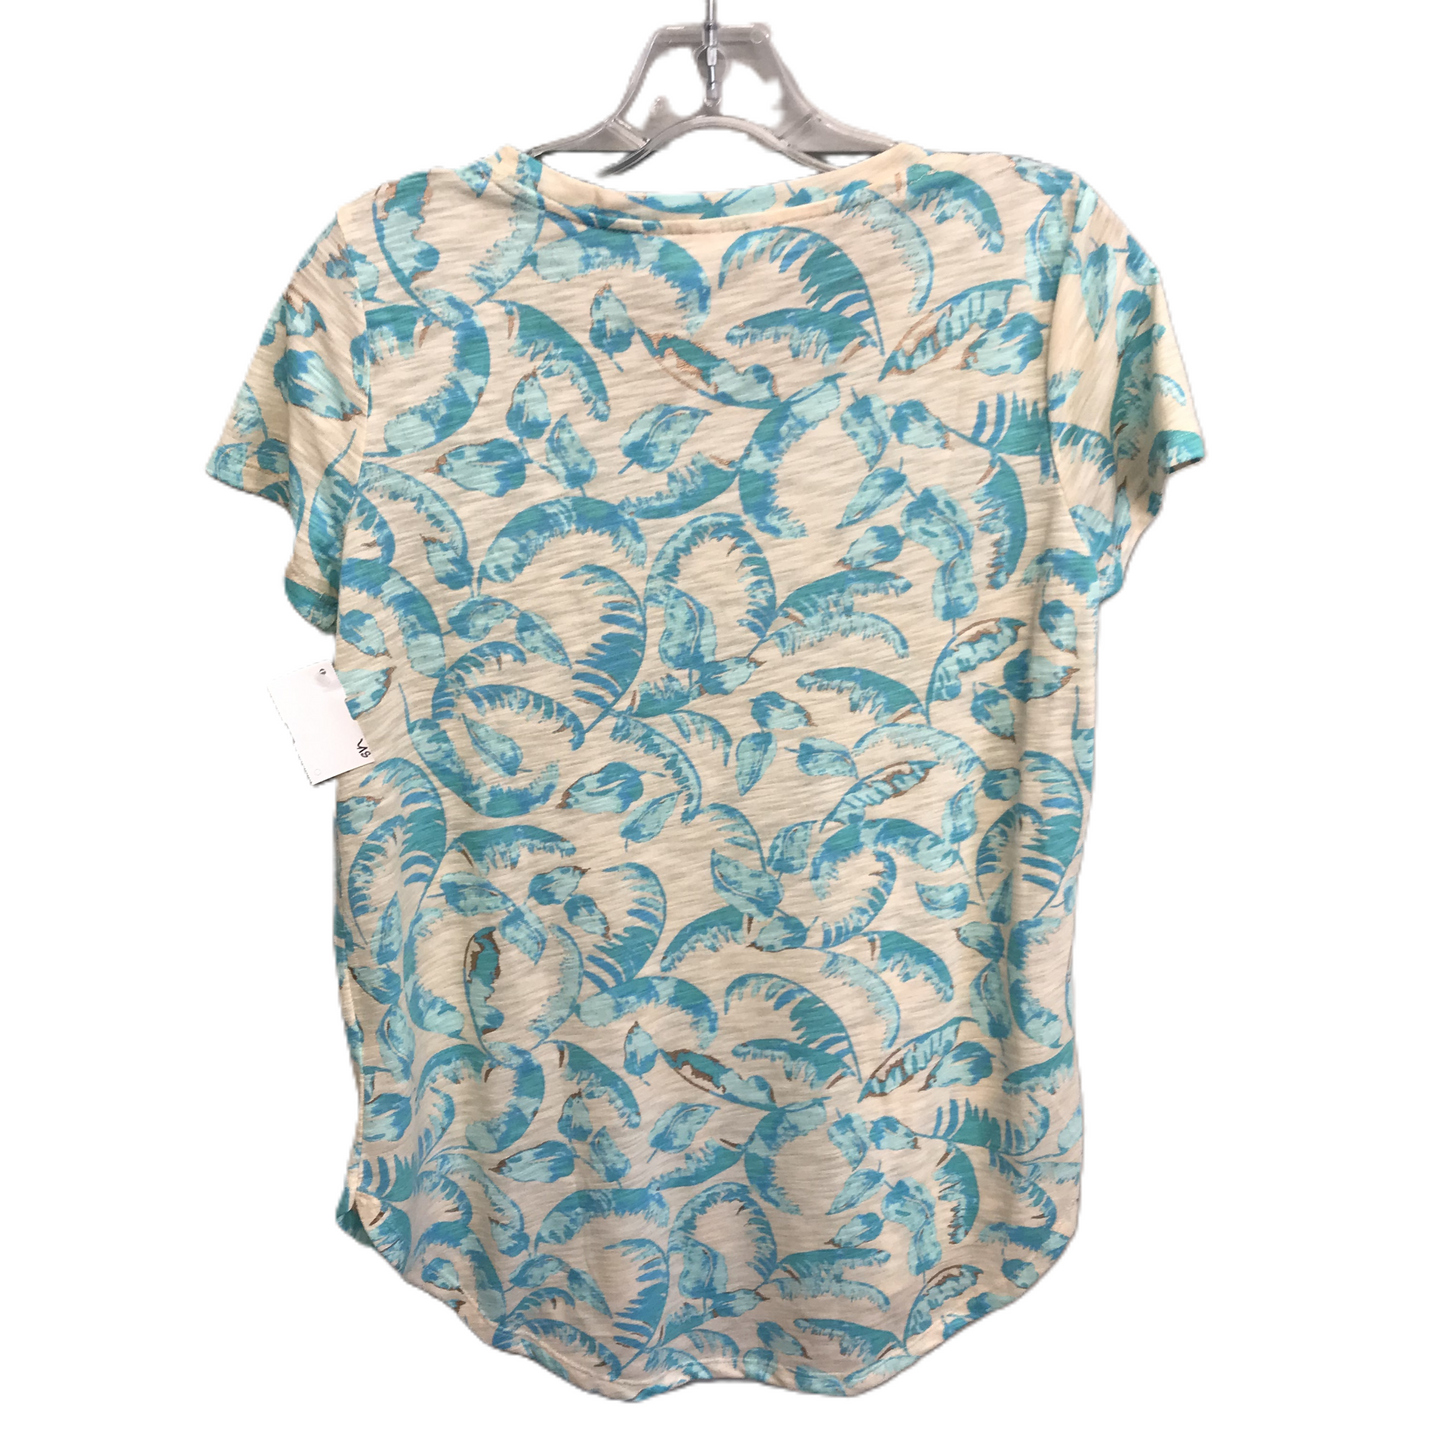 Tropical Print Top Short Sleeve By Lc Lauren Conrad, Size: M